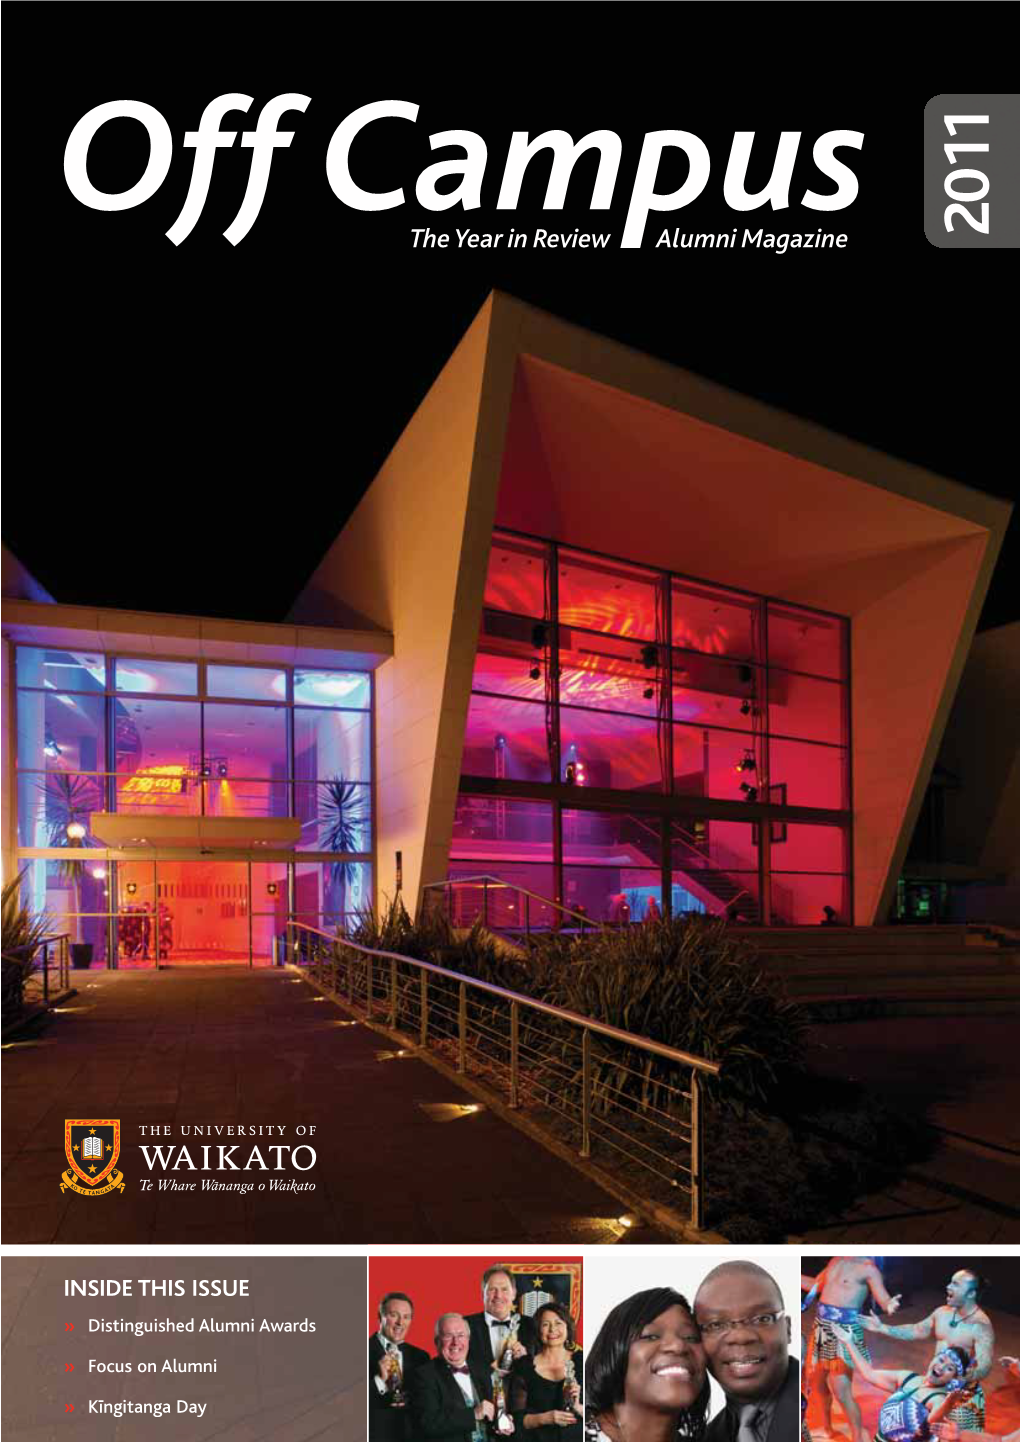 Alumni Magazine the Year in Review